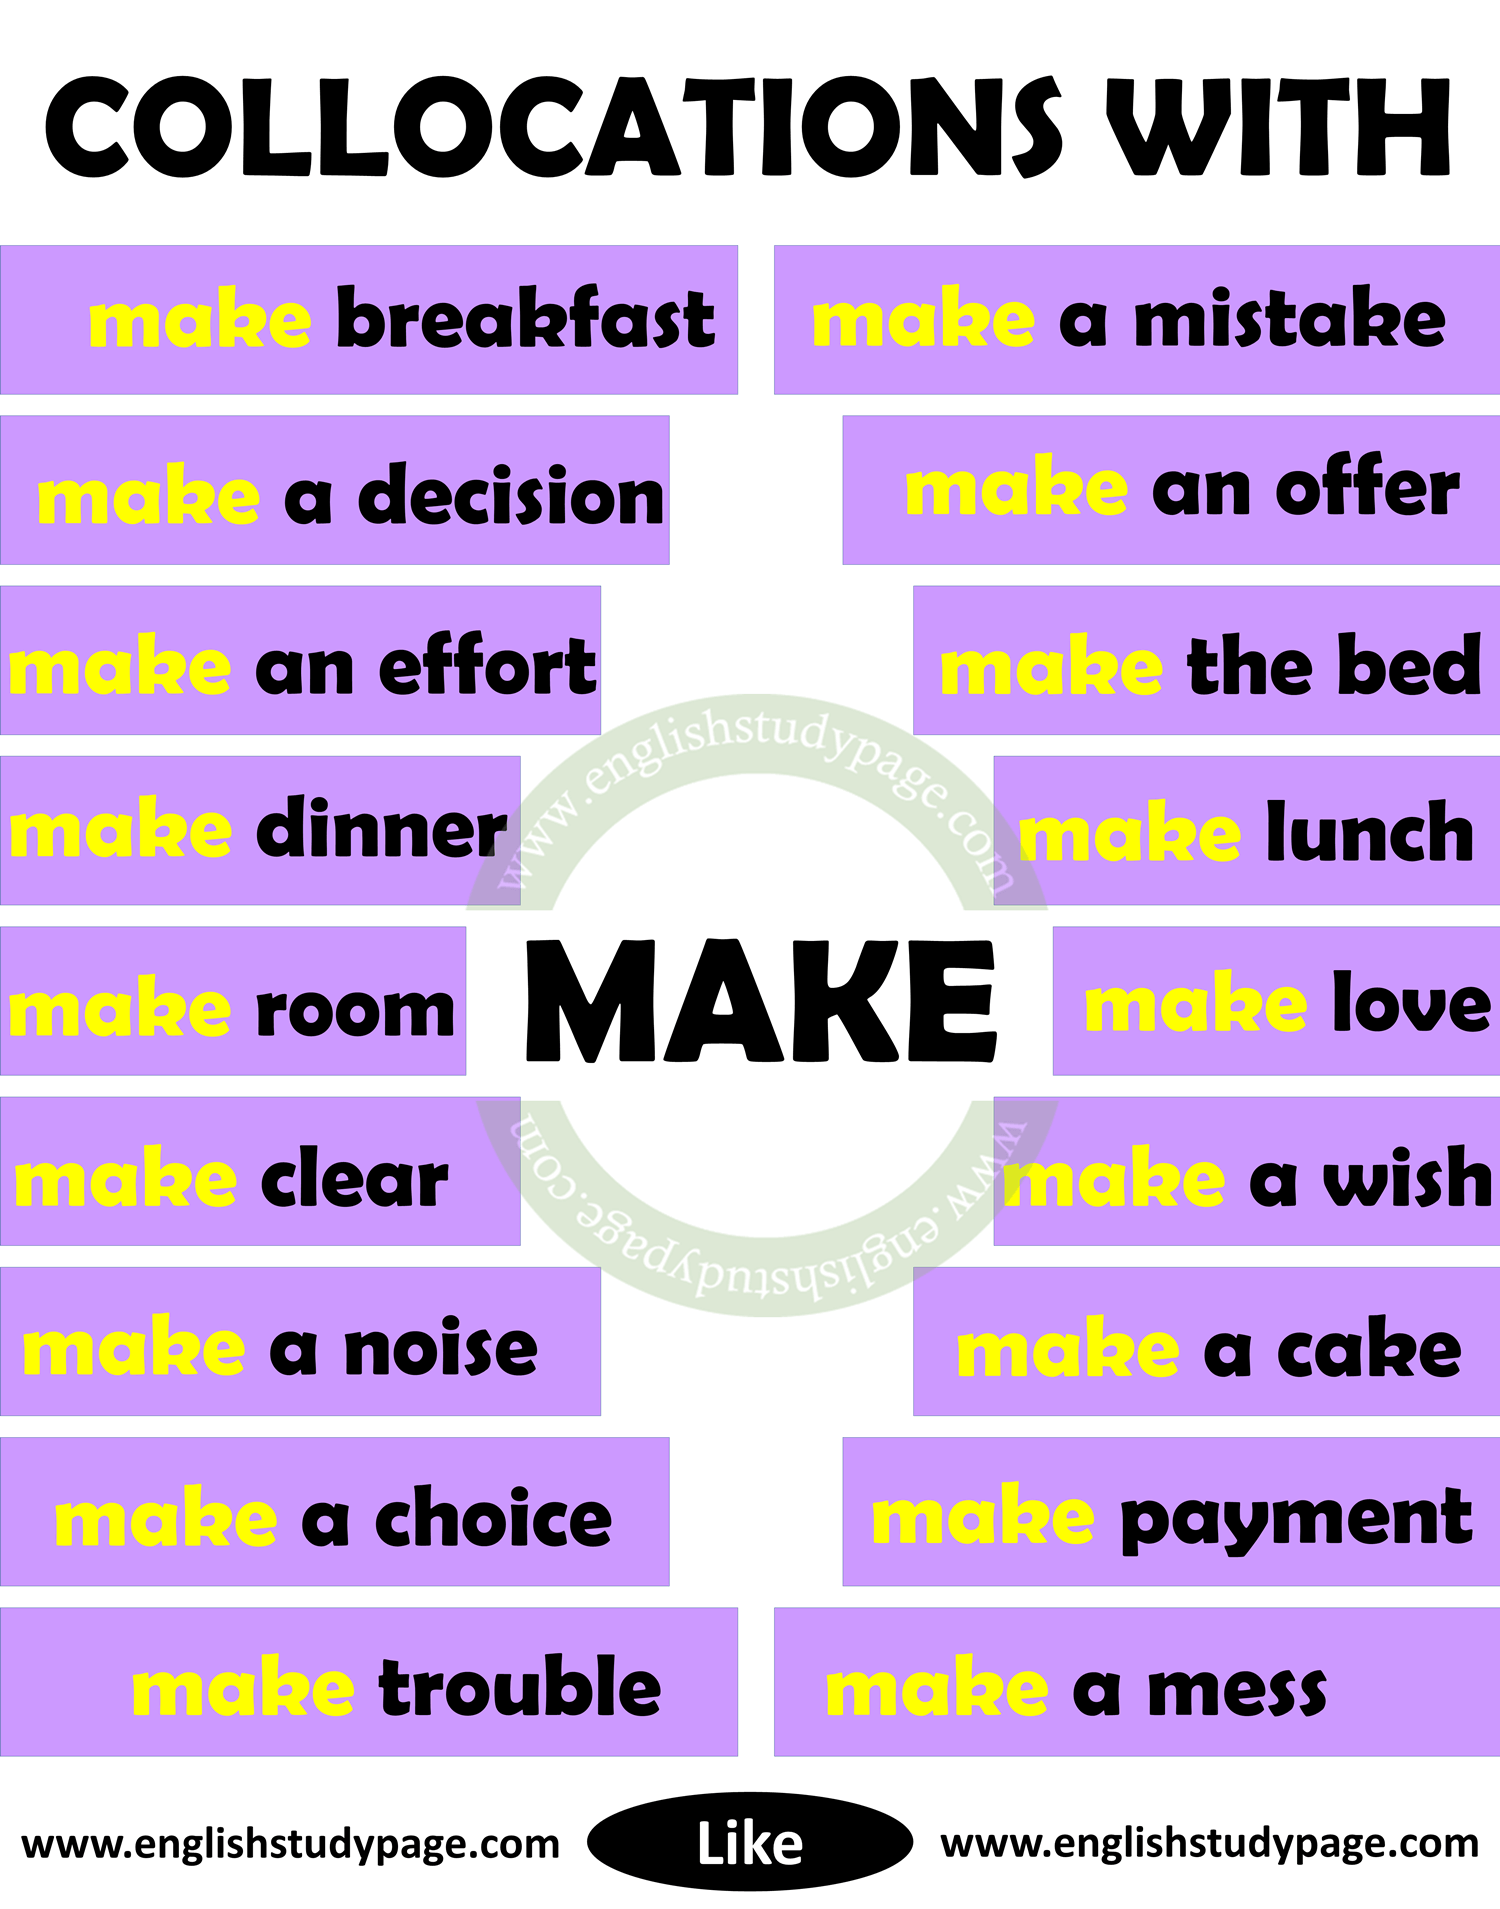 Collocations With MAKE in English